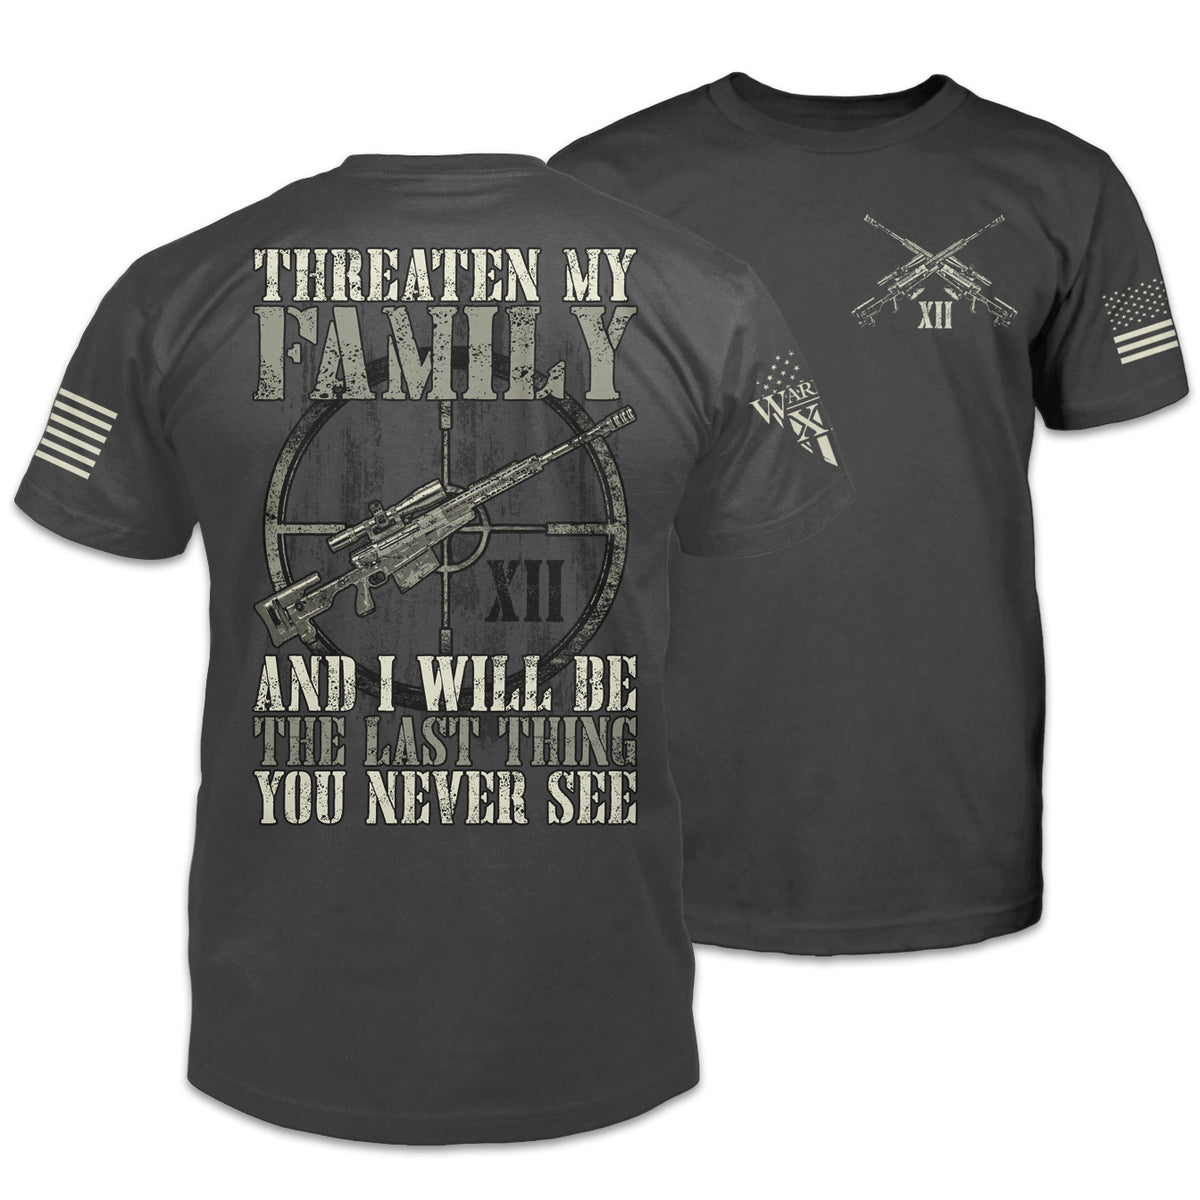 Front & back grey t-shirt with the words "Threaten My Family and I'll Be The Last Thing You Never See" and a gun printed on the shirt.